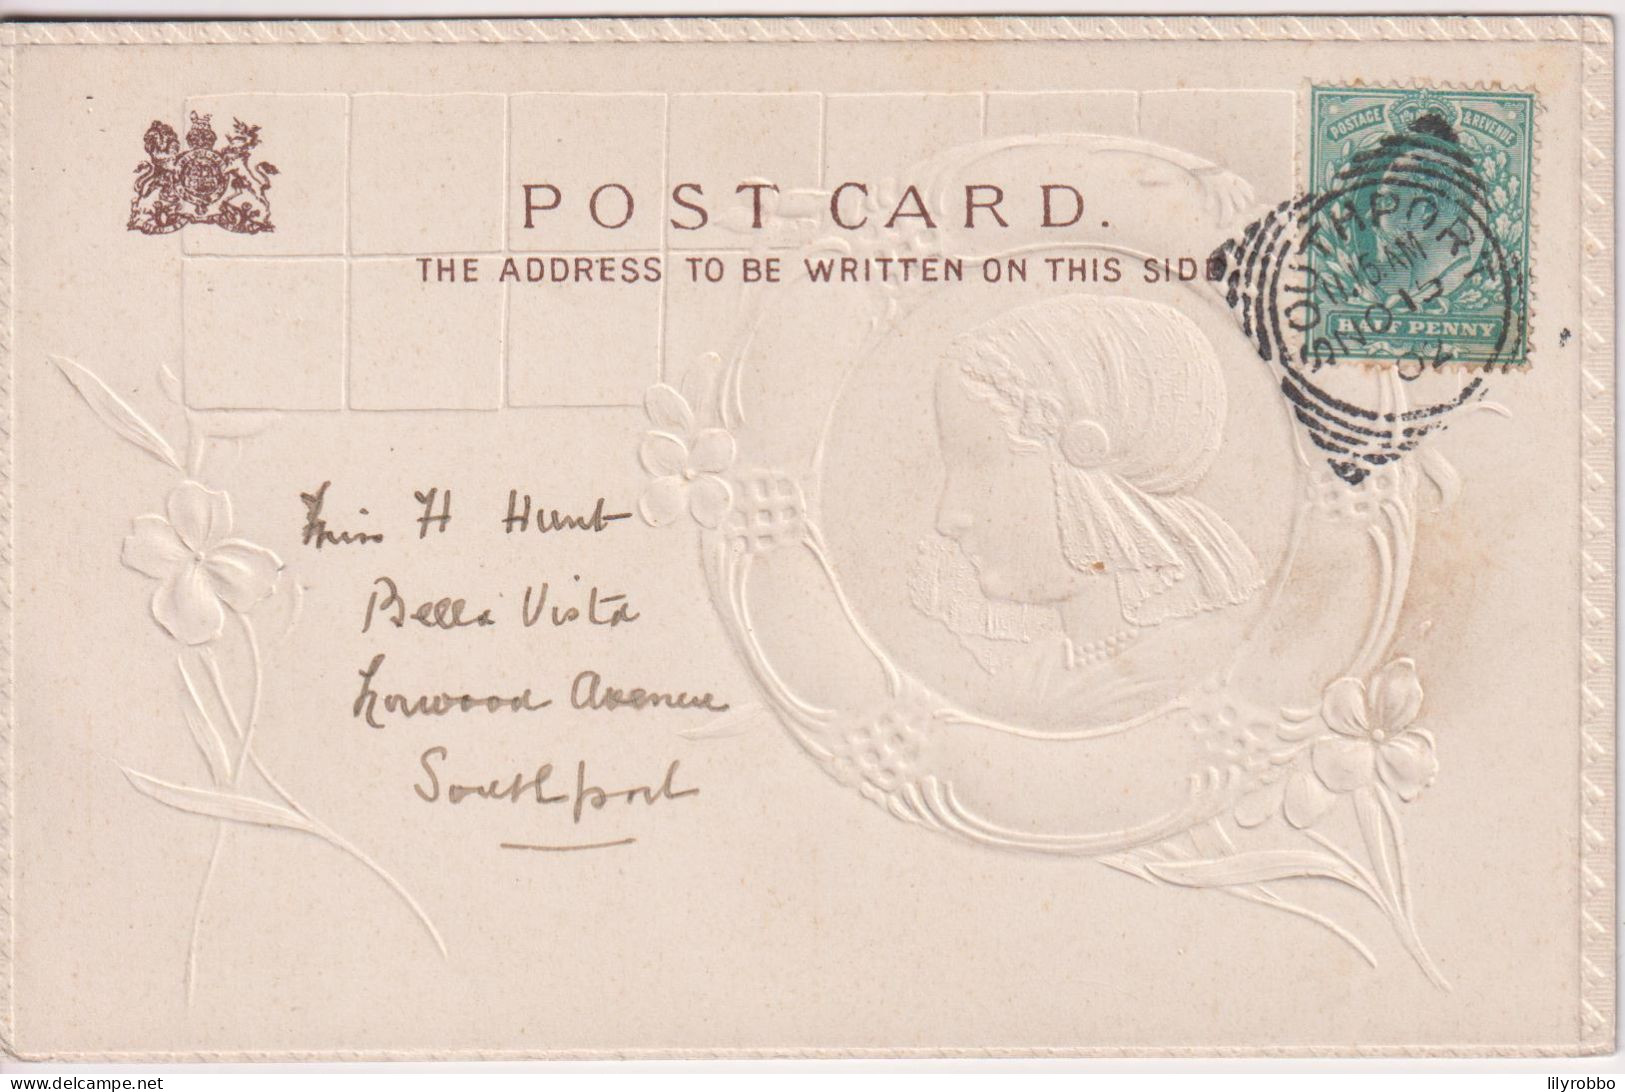 NETHERLANDS - Embossed Card Of Fishing Boats & Young Girl. Undivided - Southport SQ PM 1902 - Pêche